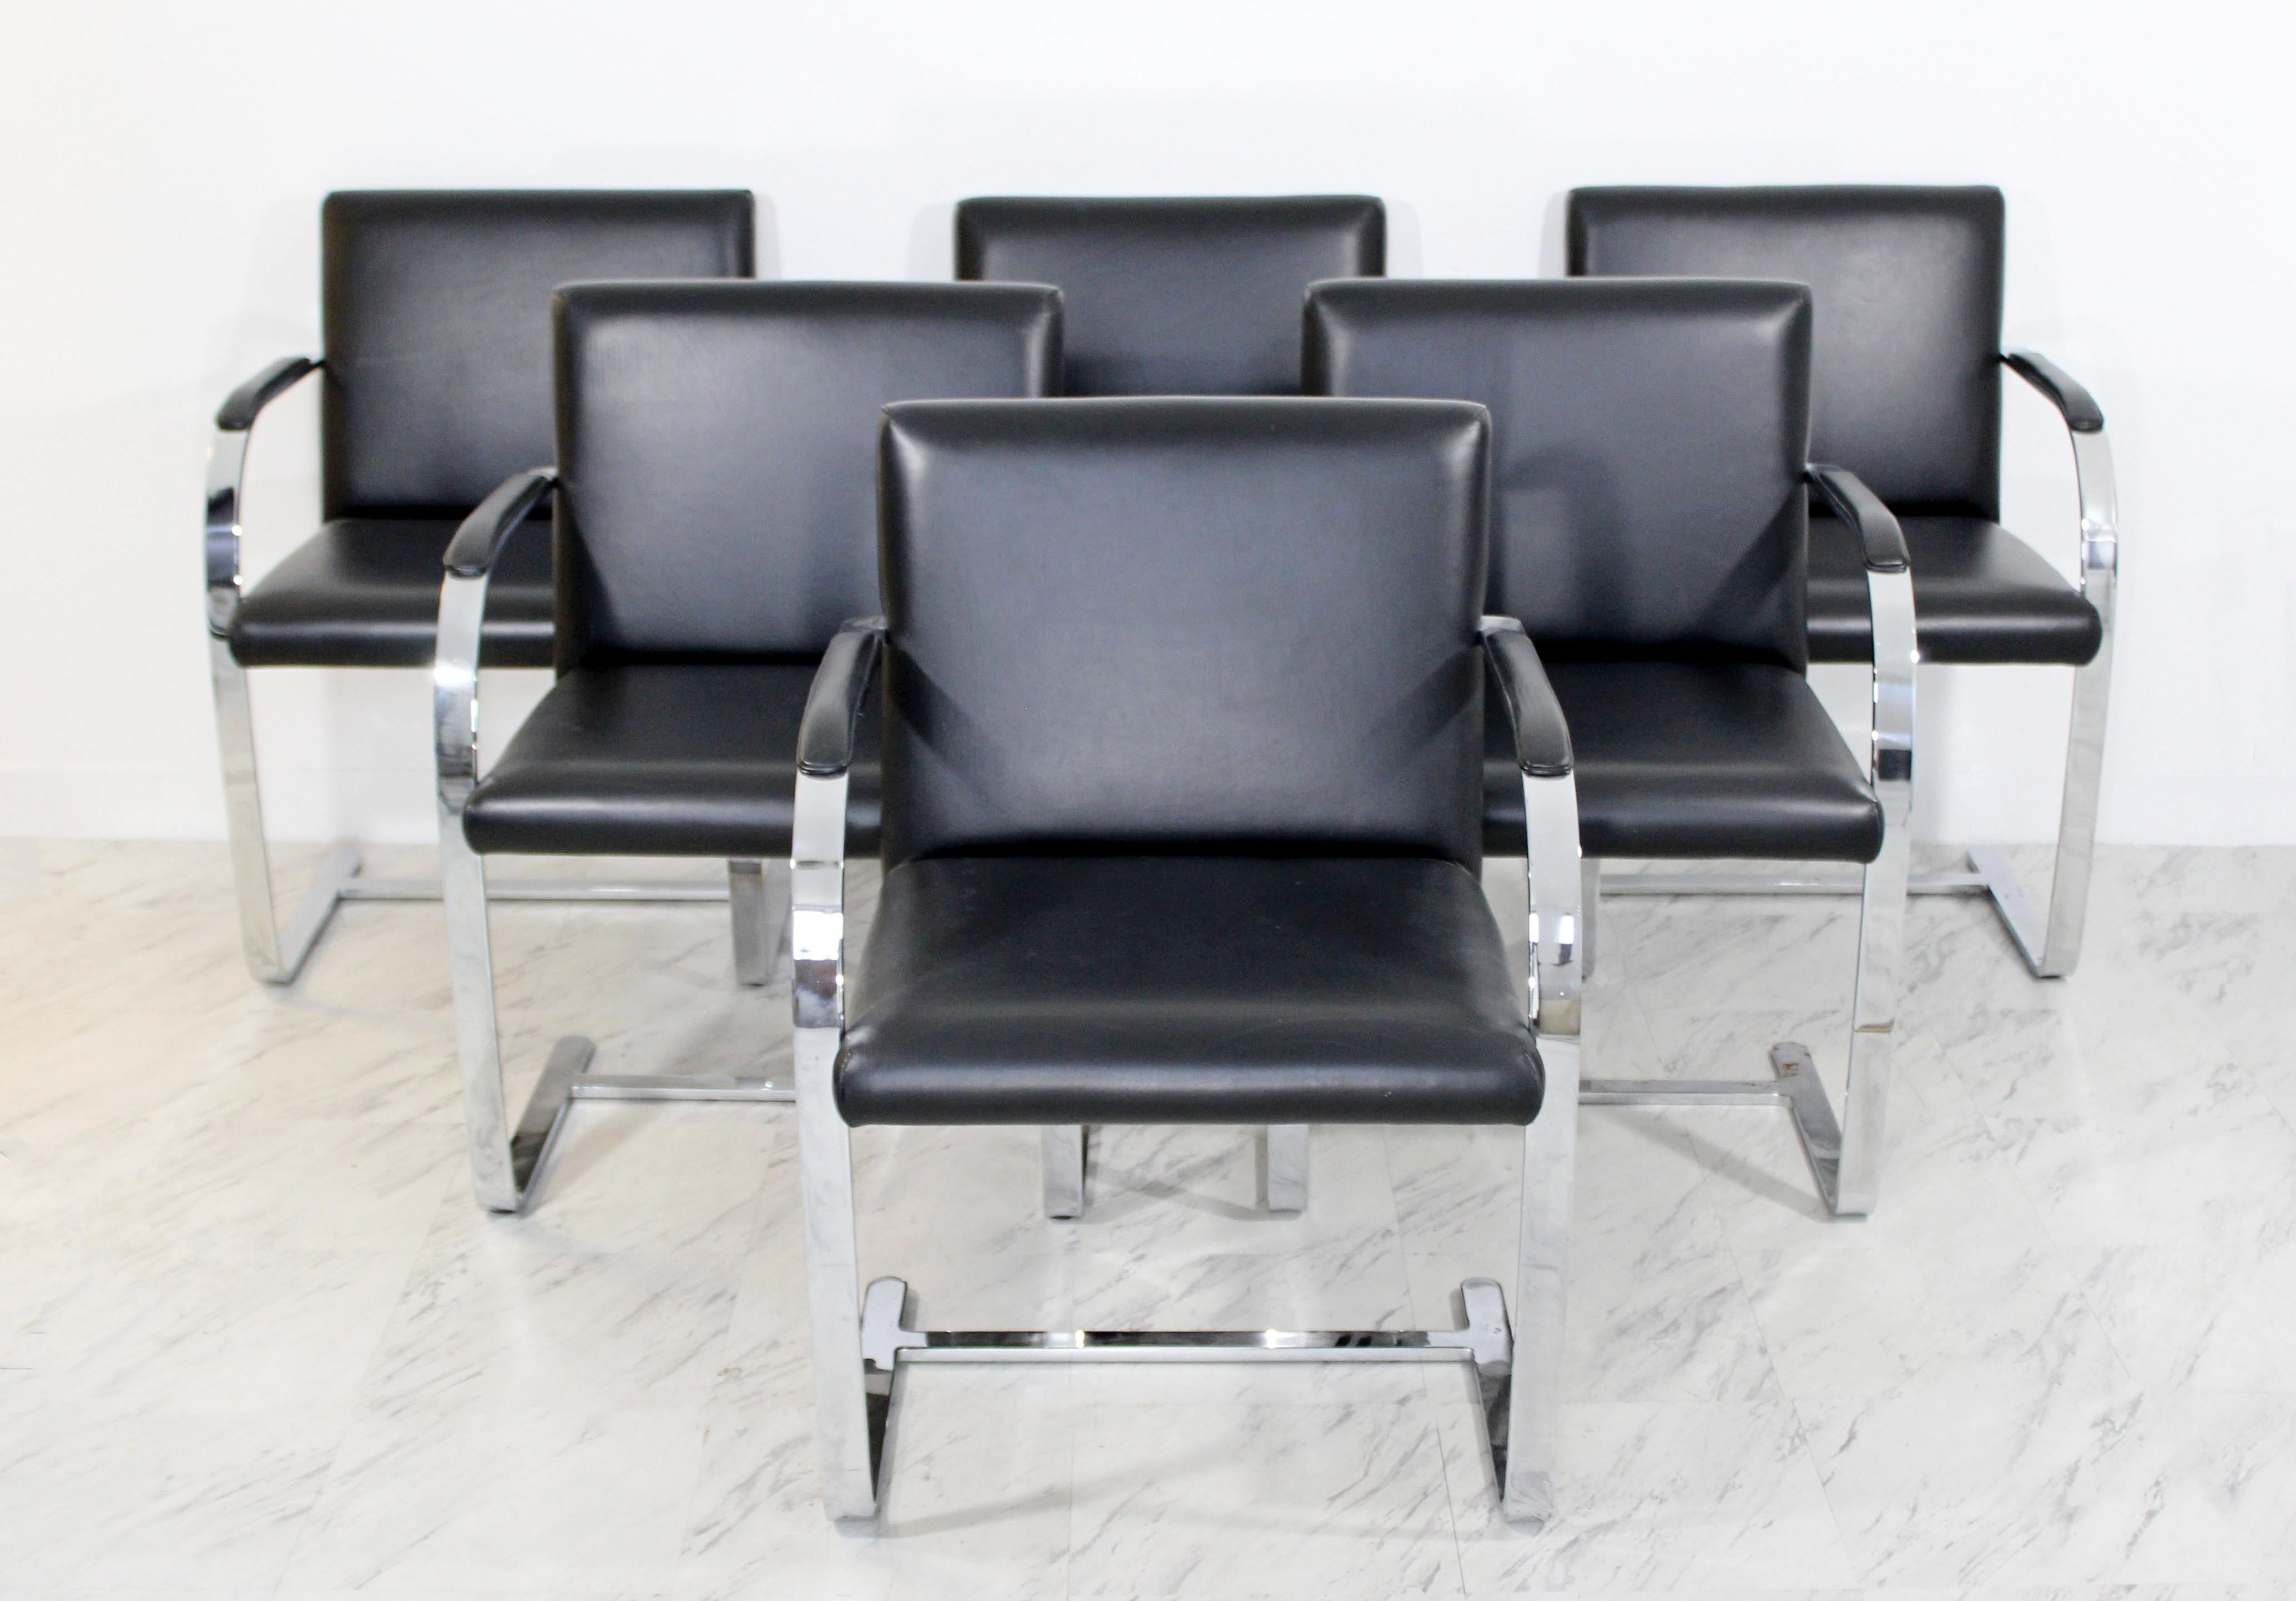 For your consideration is a gorgeous, set of six, chrome and black leather, cantilever, dining armchairs, by Knoll, circa 1970s. In excellent condition. The dimensions are 23